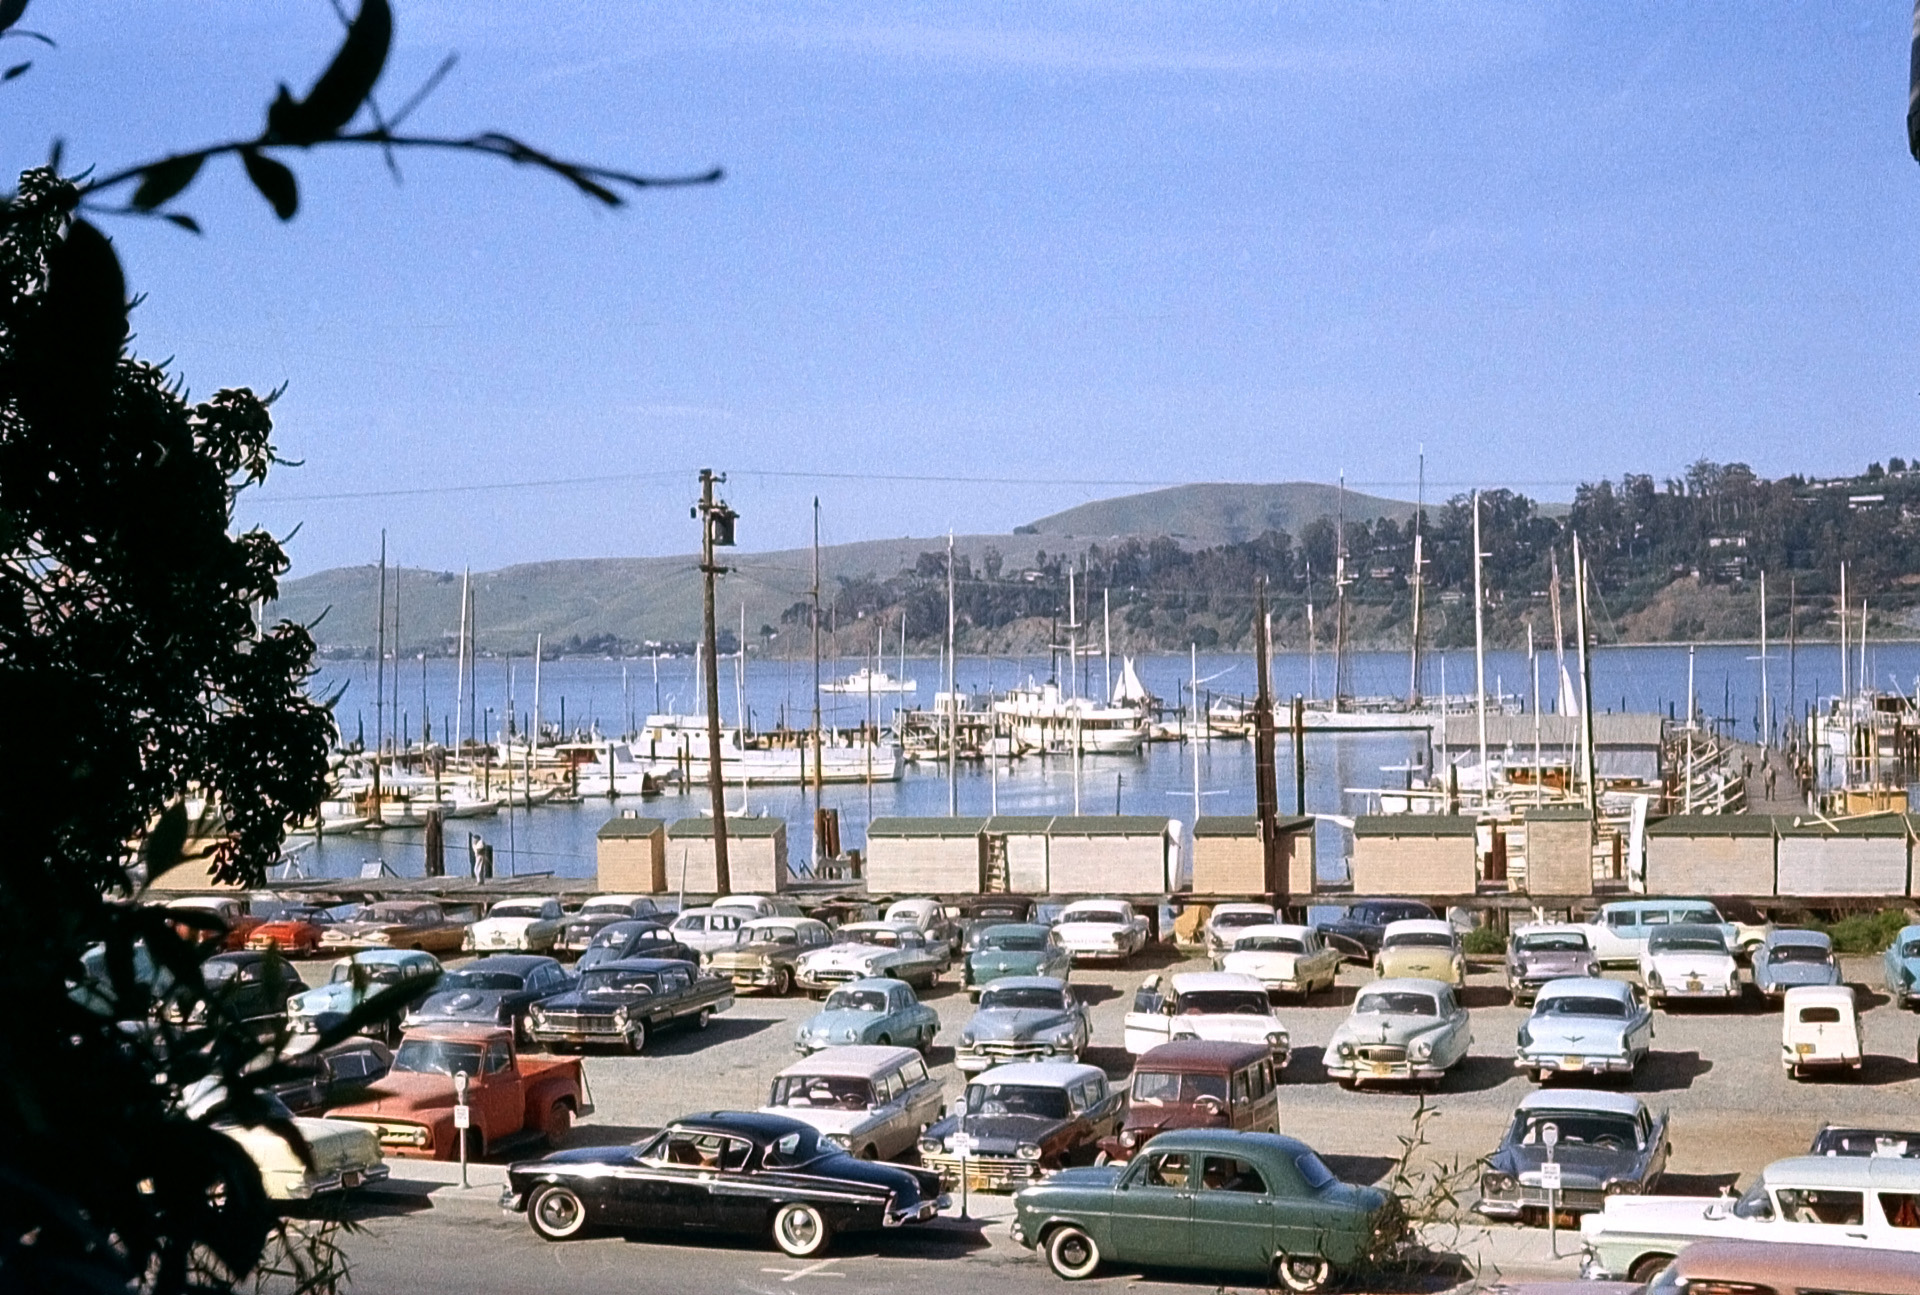 The yacht harbor in Sausalito, California, shot on Anscochrome circa 1958. I believe this is on Richardson Bay, with Belvedere Point in the background. There are some pretty interesting cars in in this shot, including the mysterious little European-looking thing on the far right.  View full size.